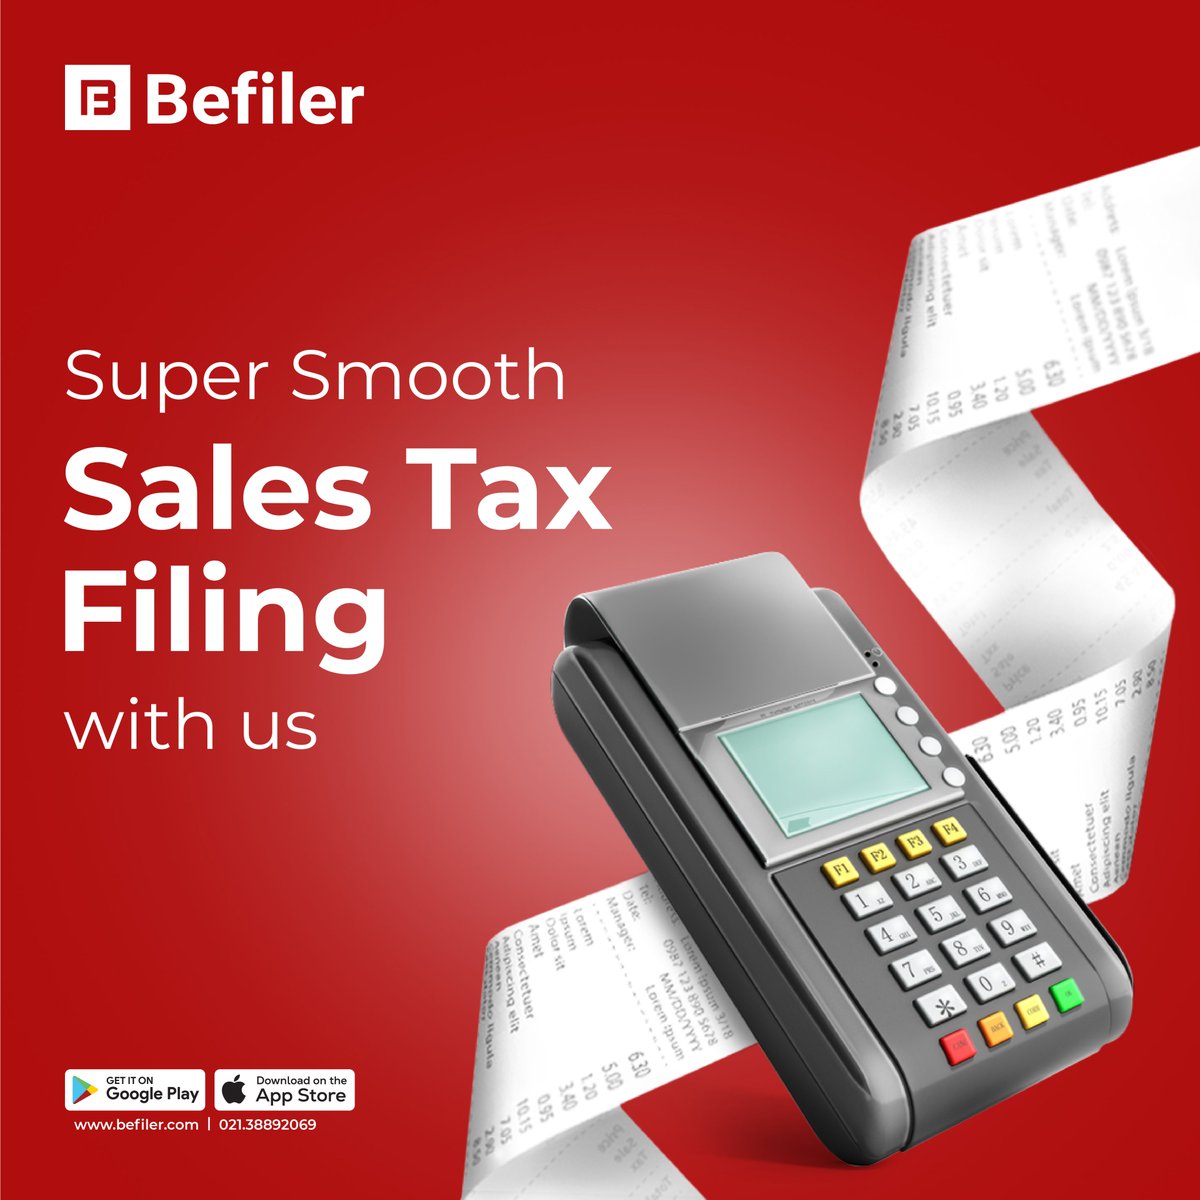 Say goodbye to the hassle of sales tax filing with Befiler! 💰💻 

#Befiler #TaxFilingMadeEasy #SimplifyYourBusiness